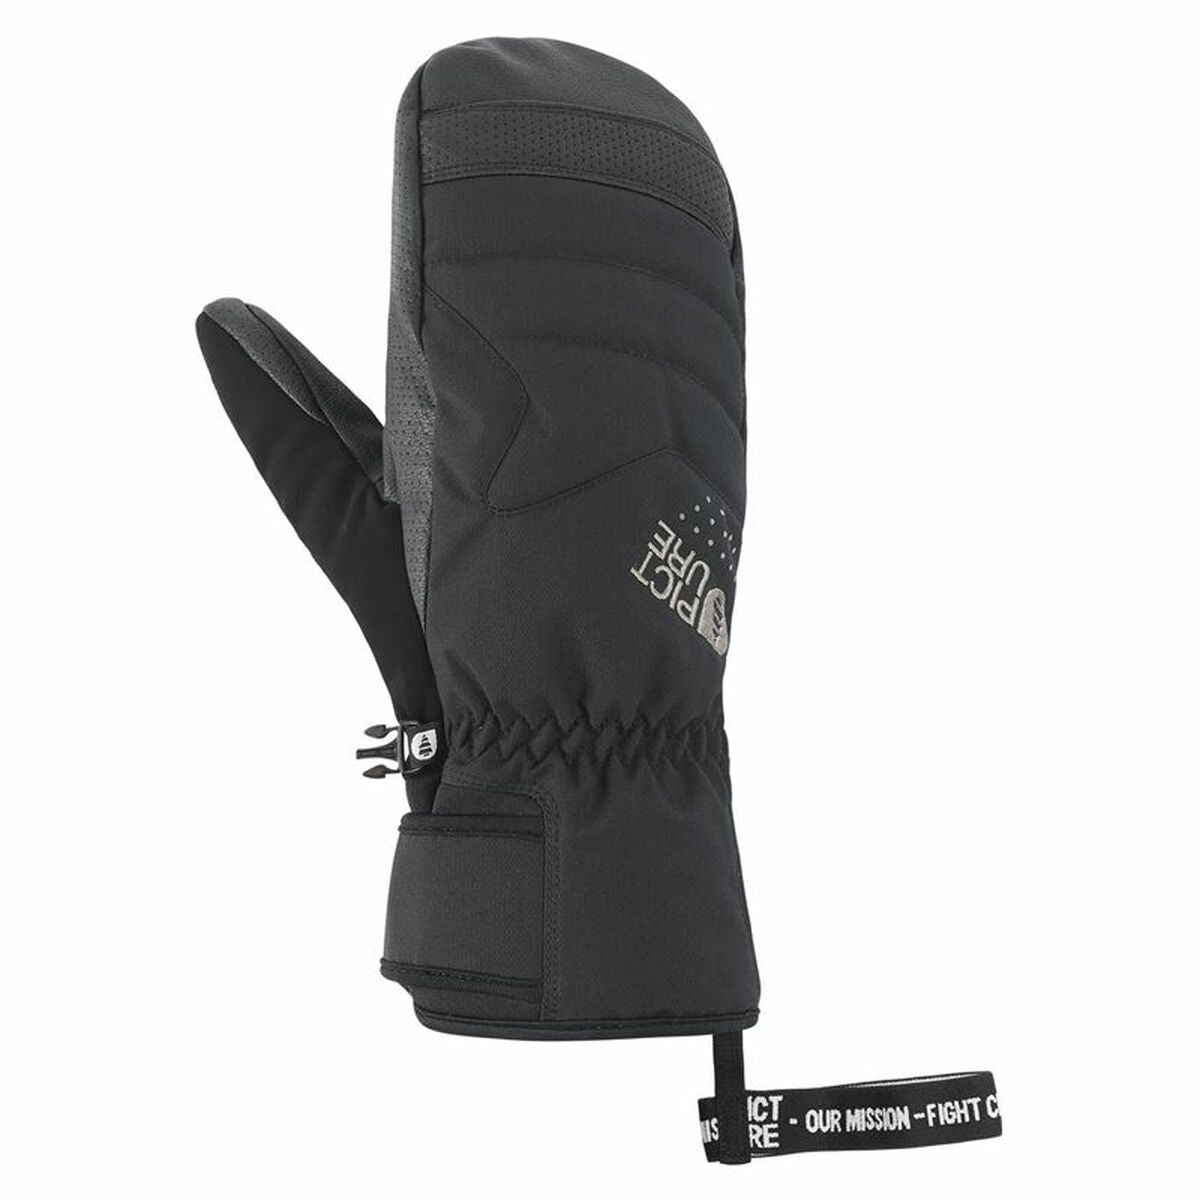 Gloves Picture  Caldwell Black